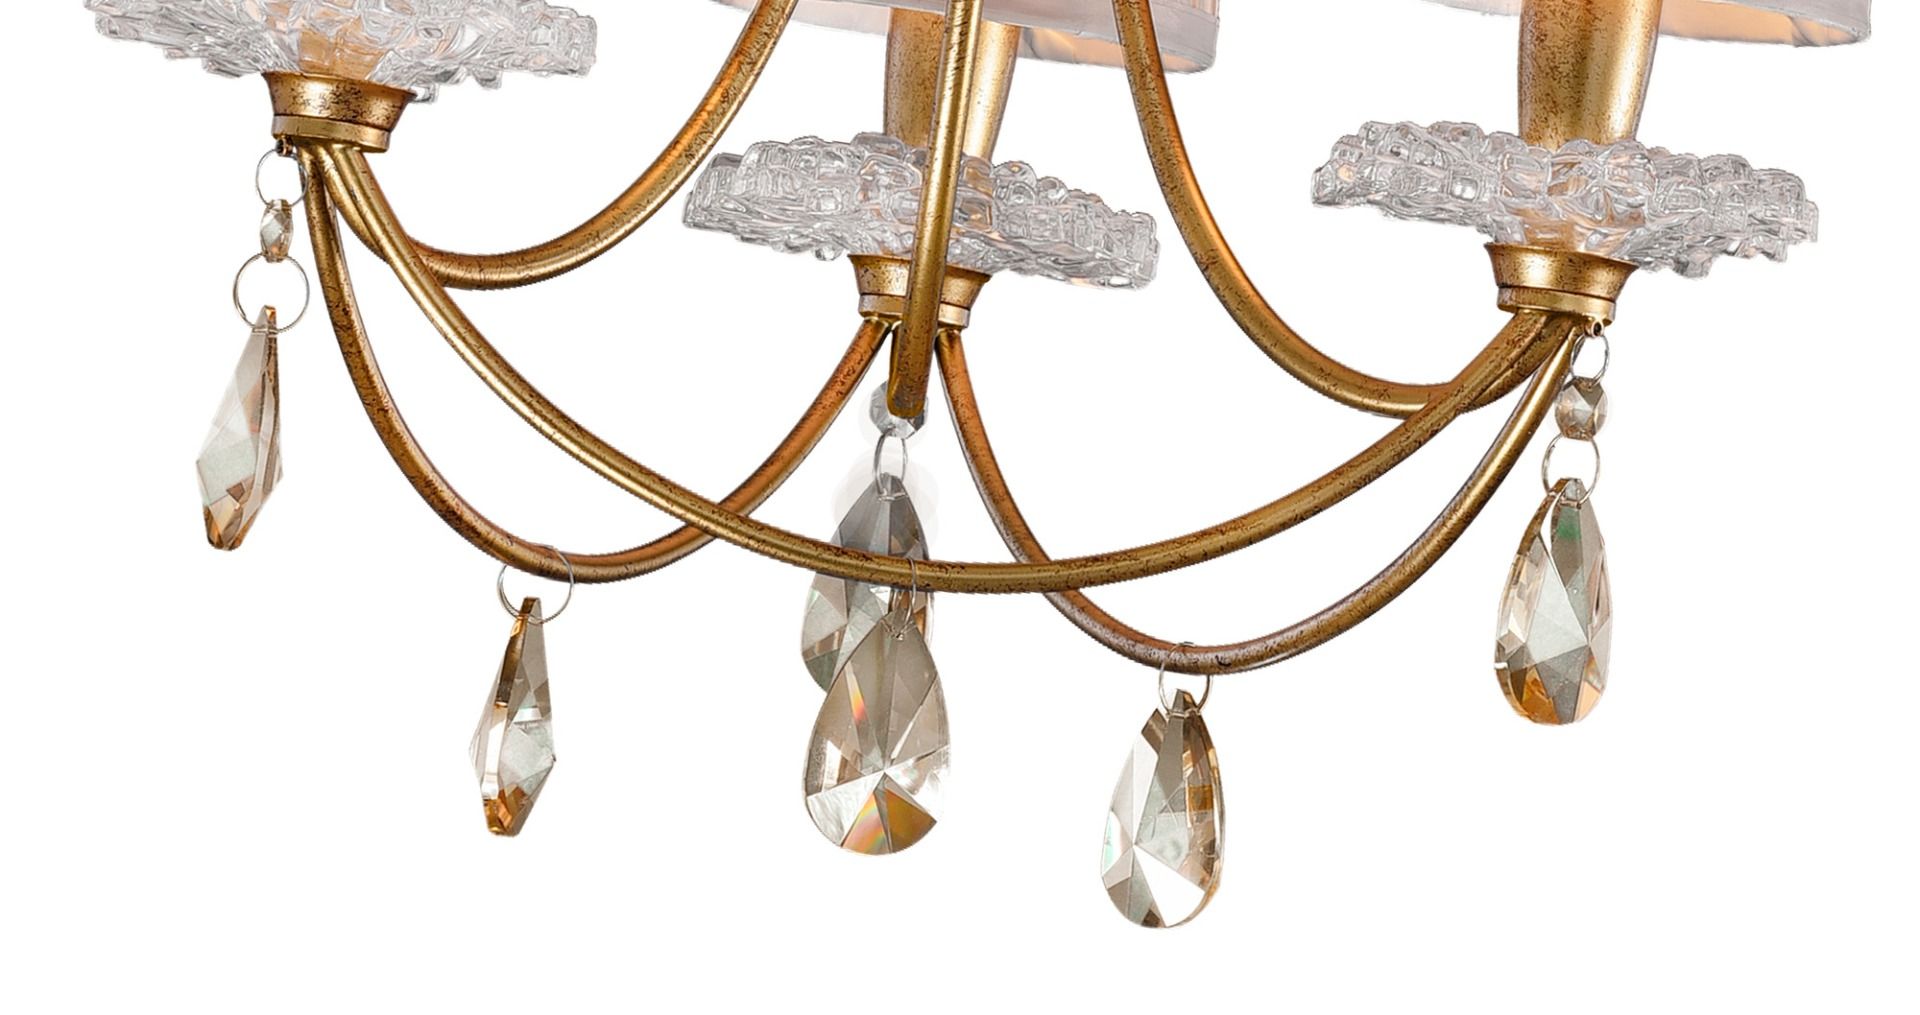 M6293 Mantra Sophie Small 3 Light Gold Chandelier